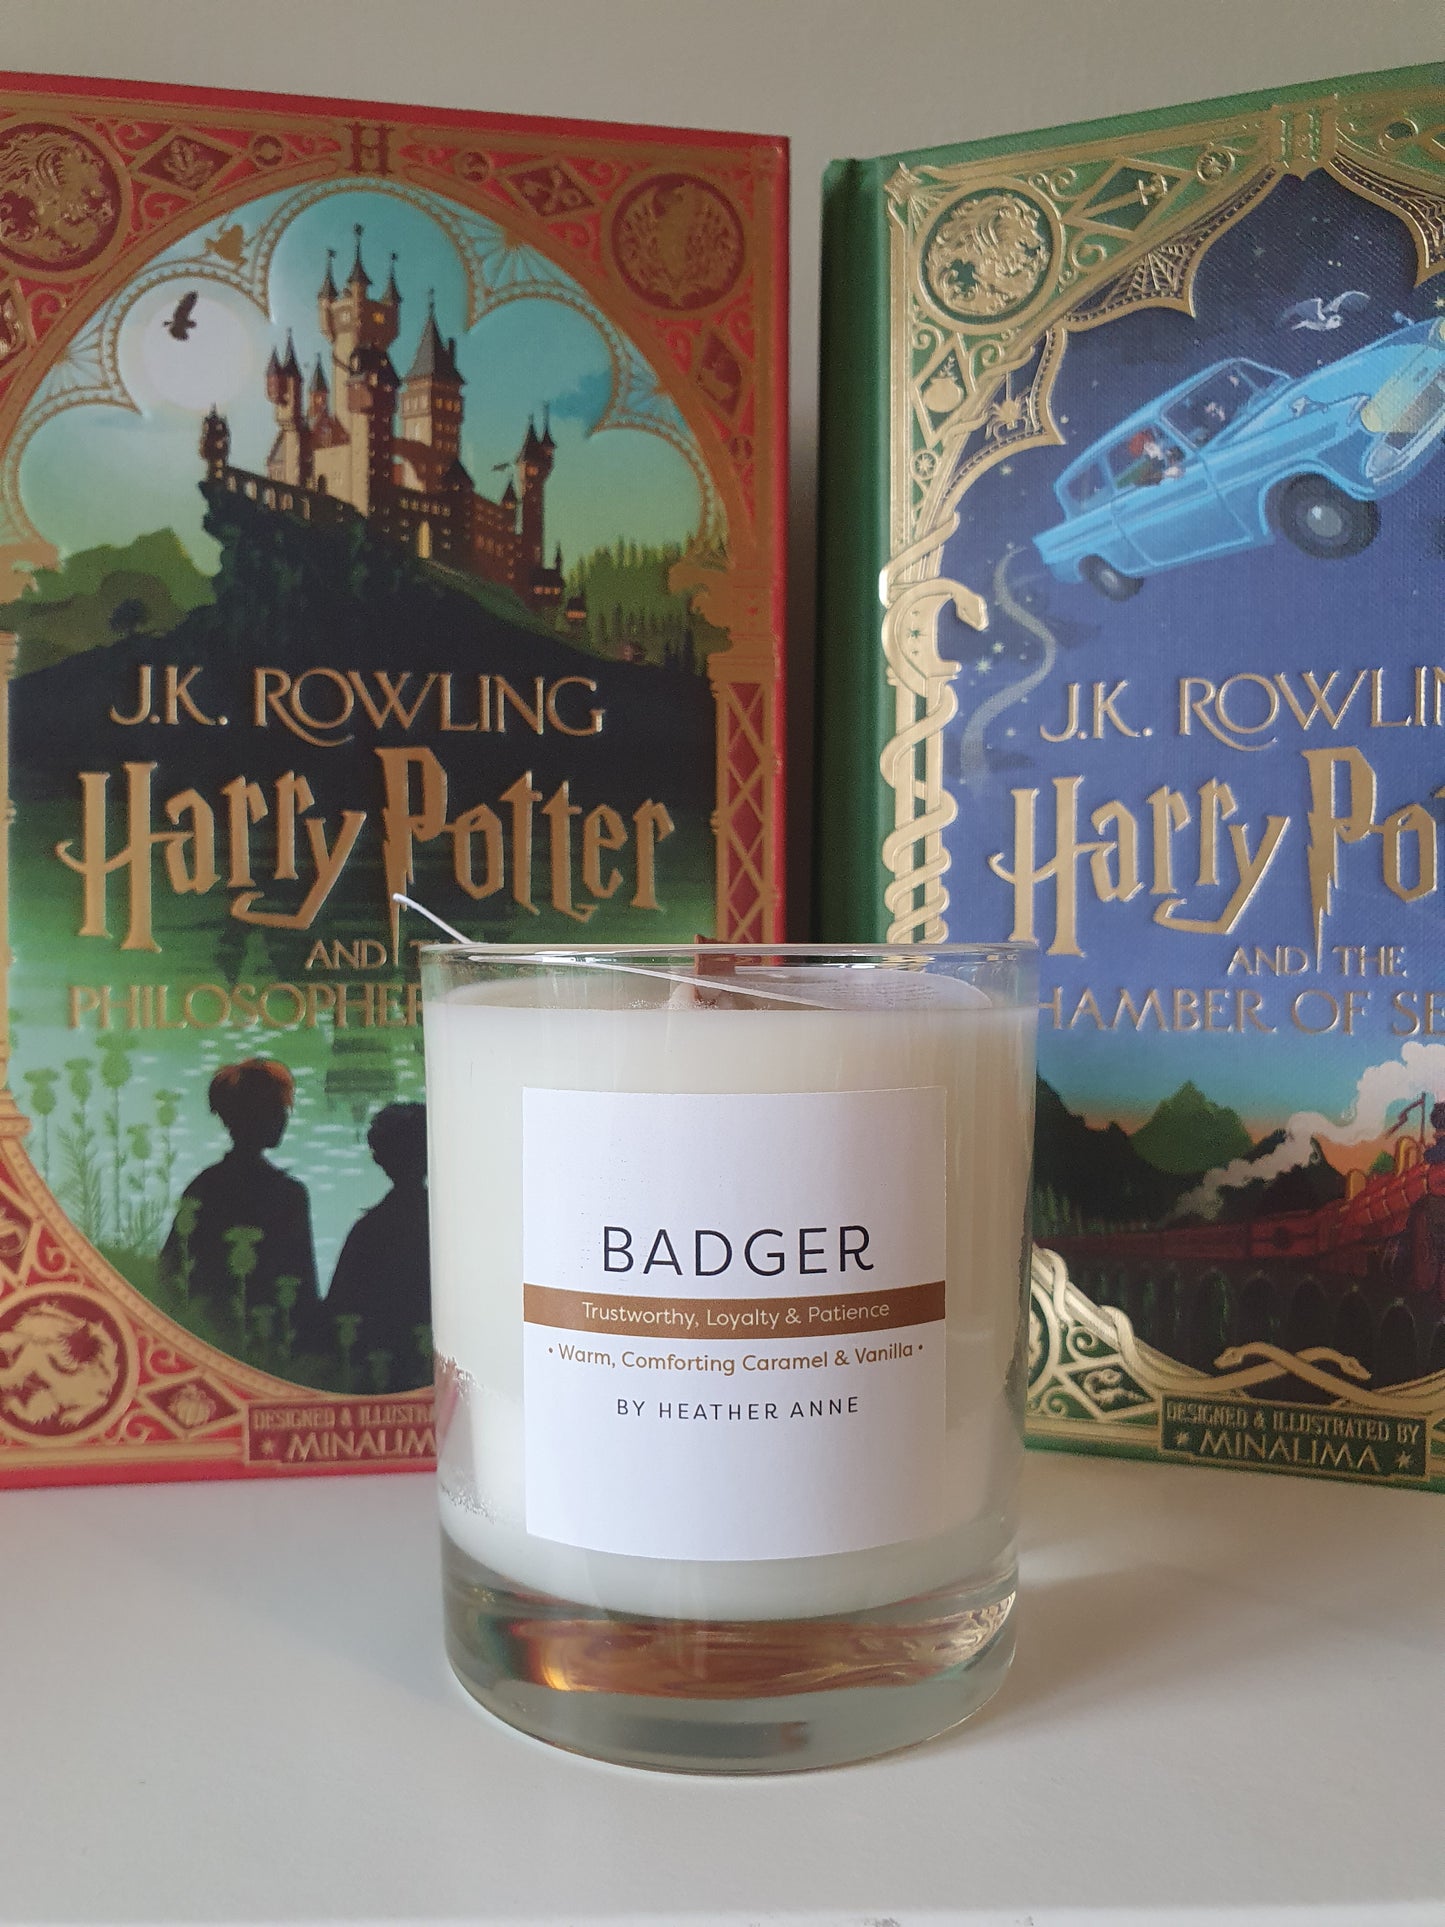 Badger Candle - Trustworthy, Loyalty & Patience